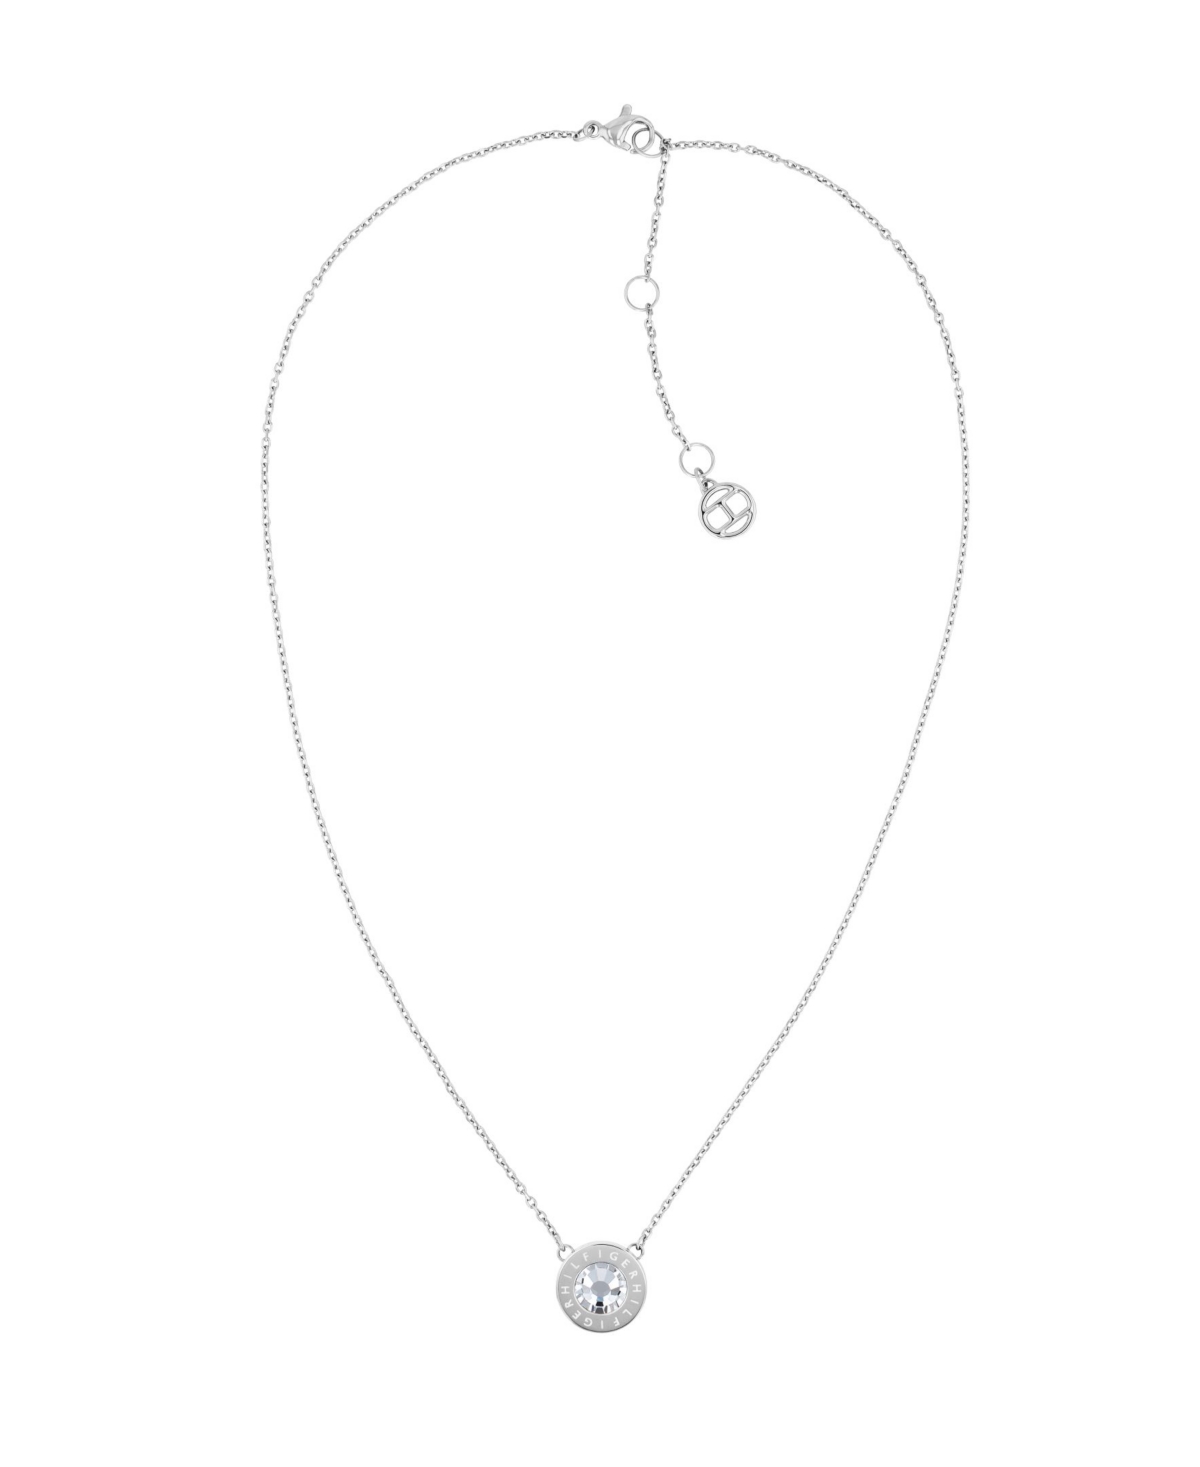 TOMMY HILFIGER WOMEN'S SILVER-TONE STAINLESS STEEL STONE NECKLACE